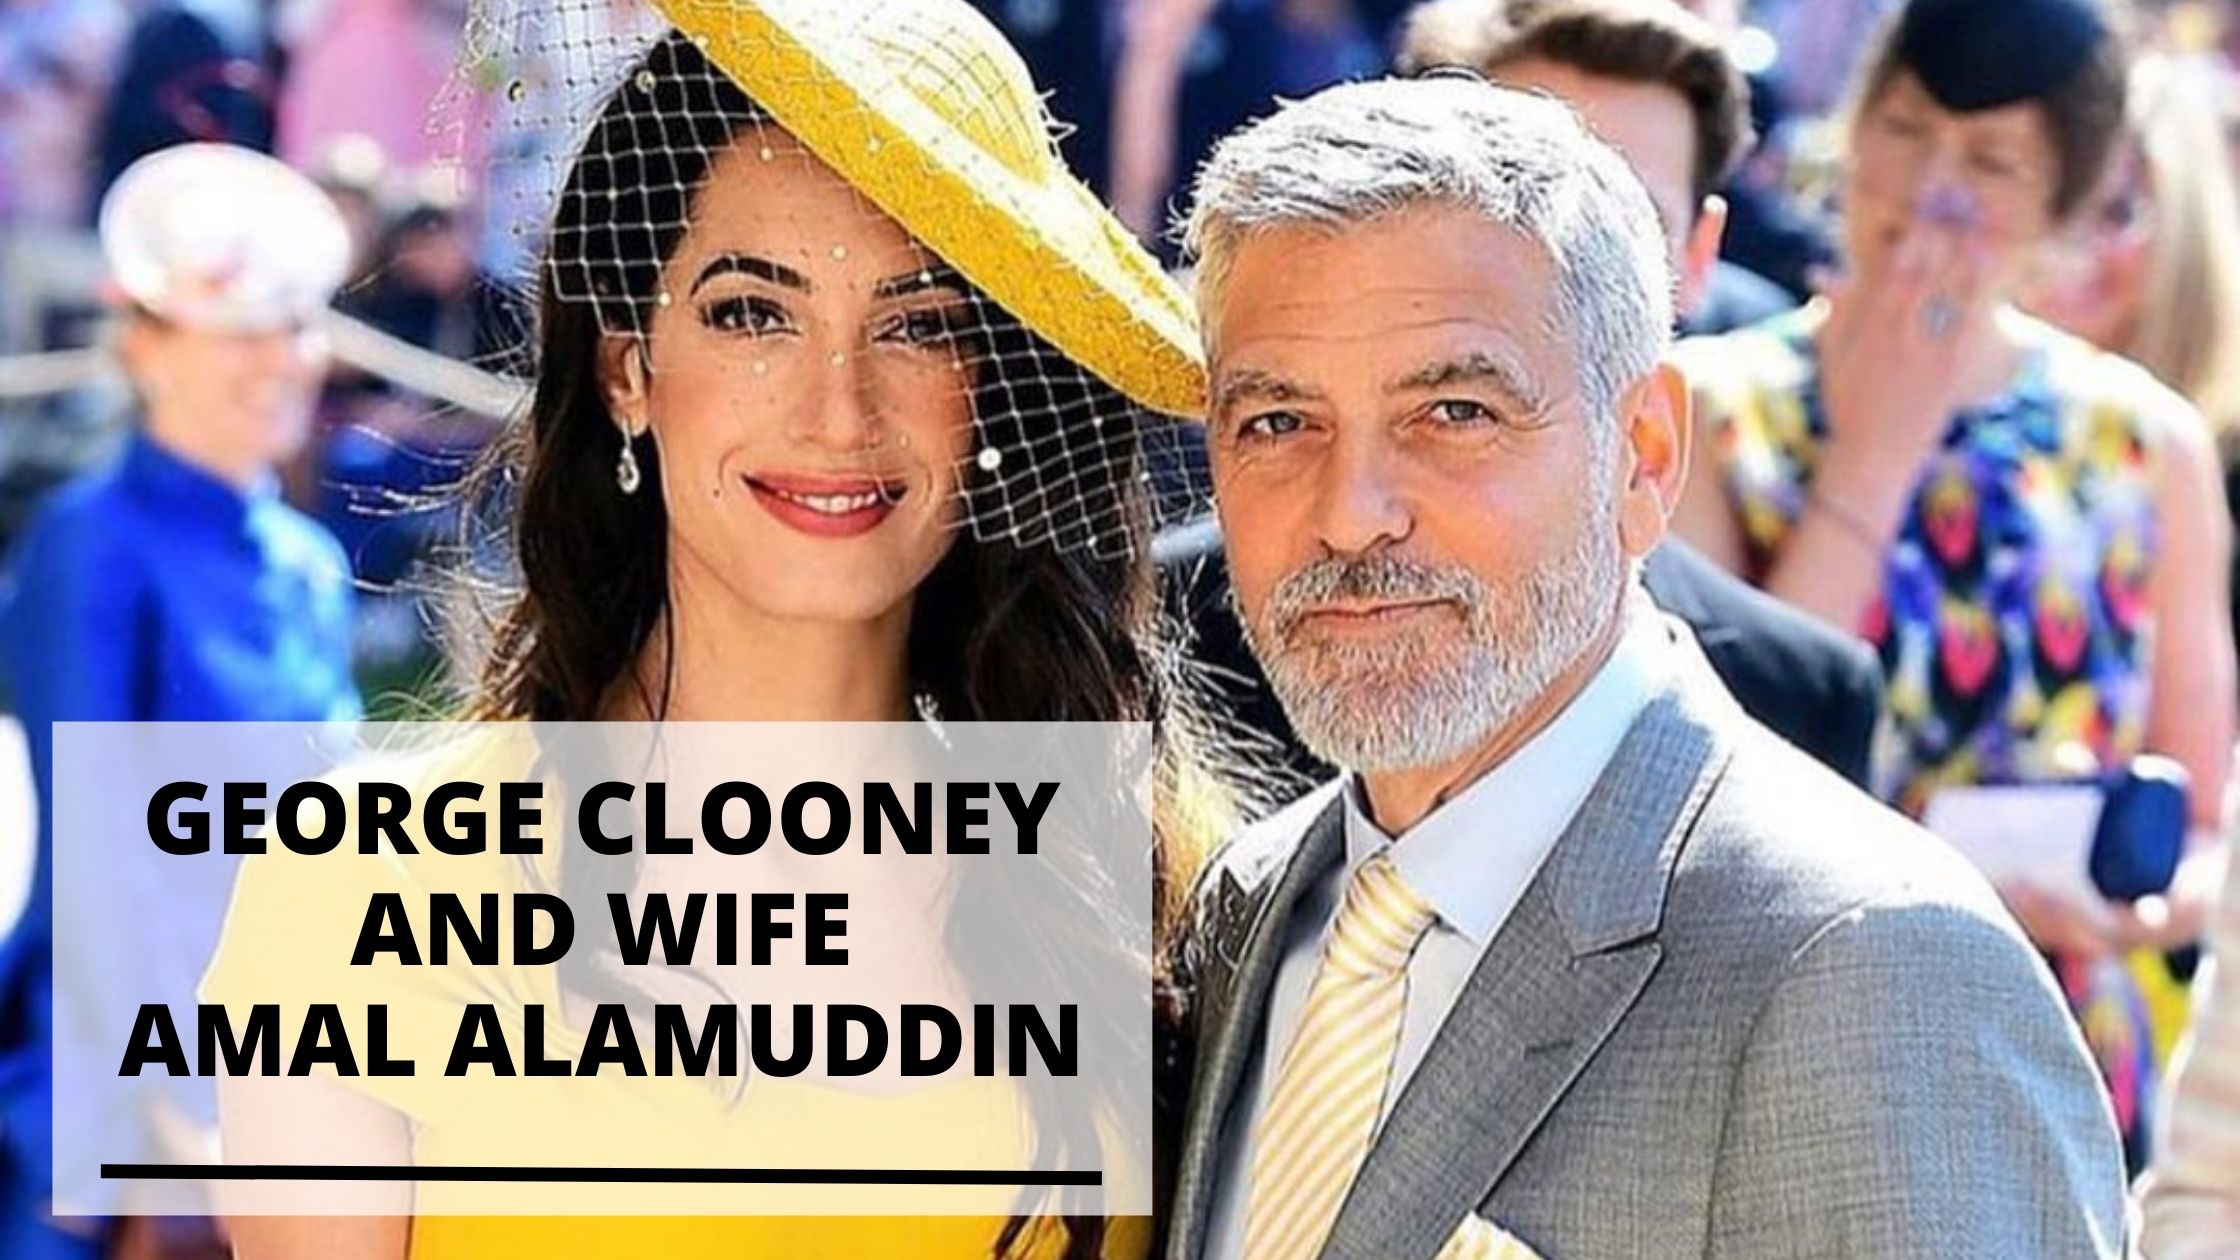 You are currently viewing 10 Photos of George Clooney and Wife Amal Alamuddin